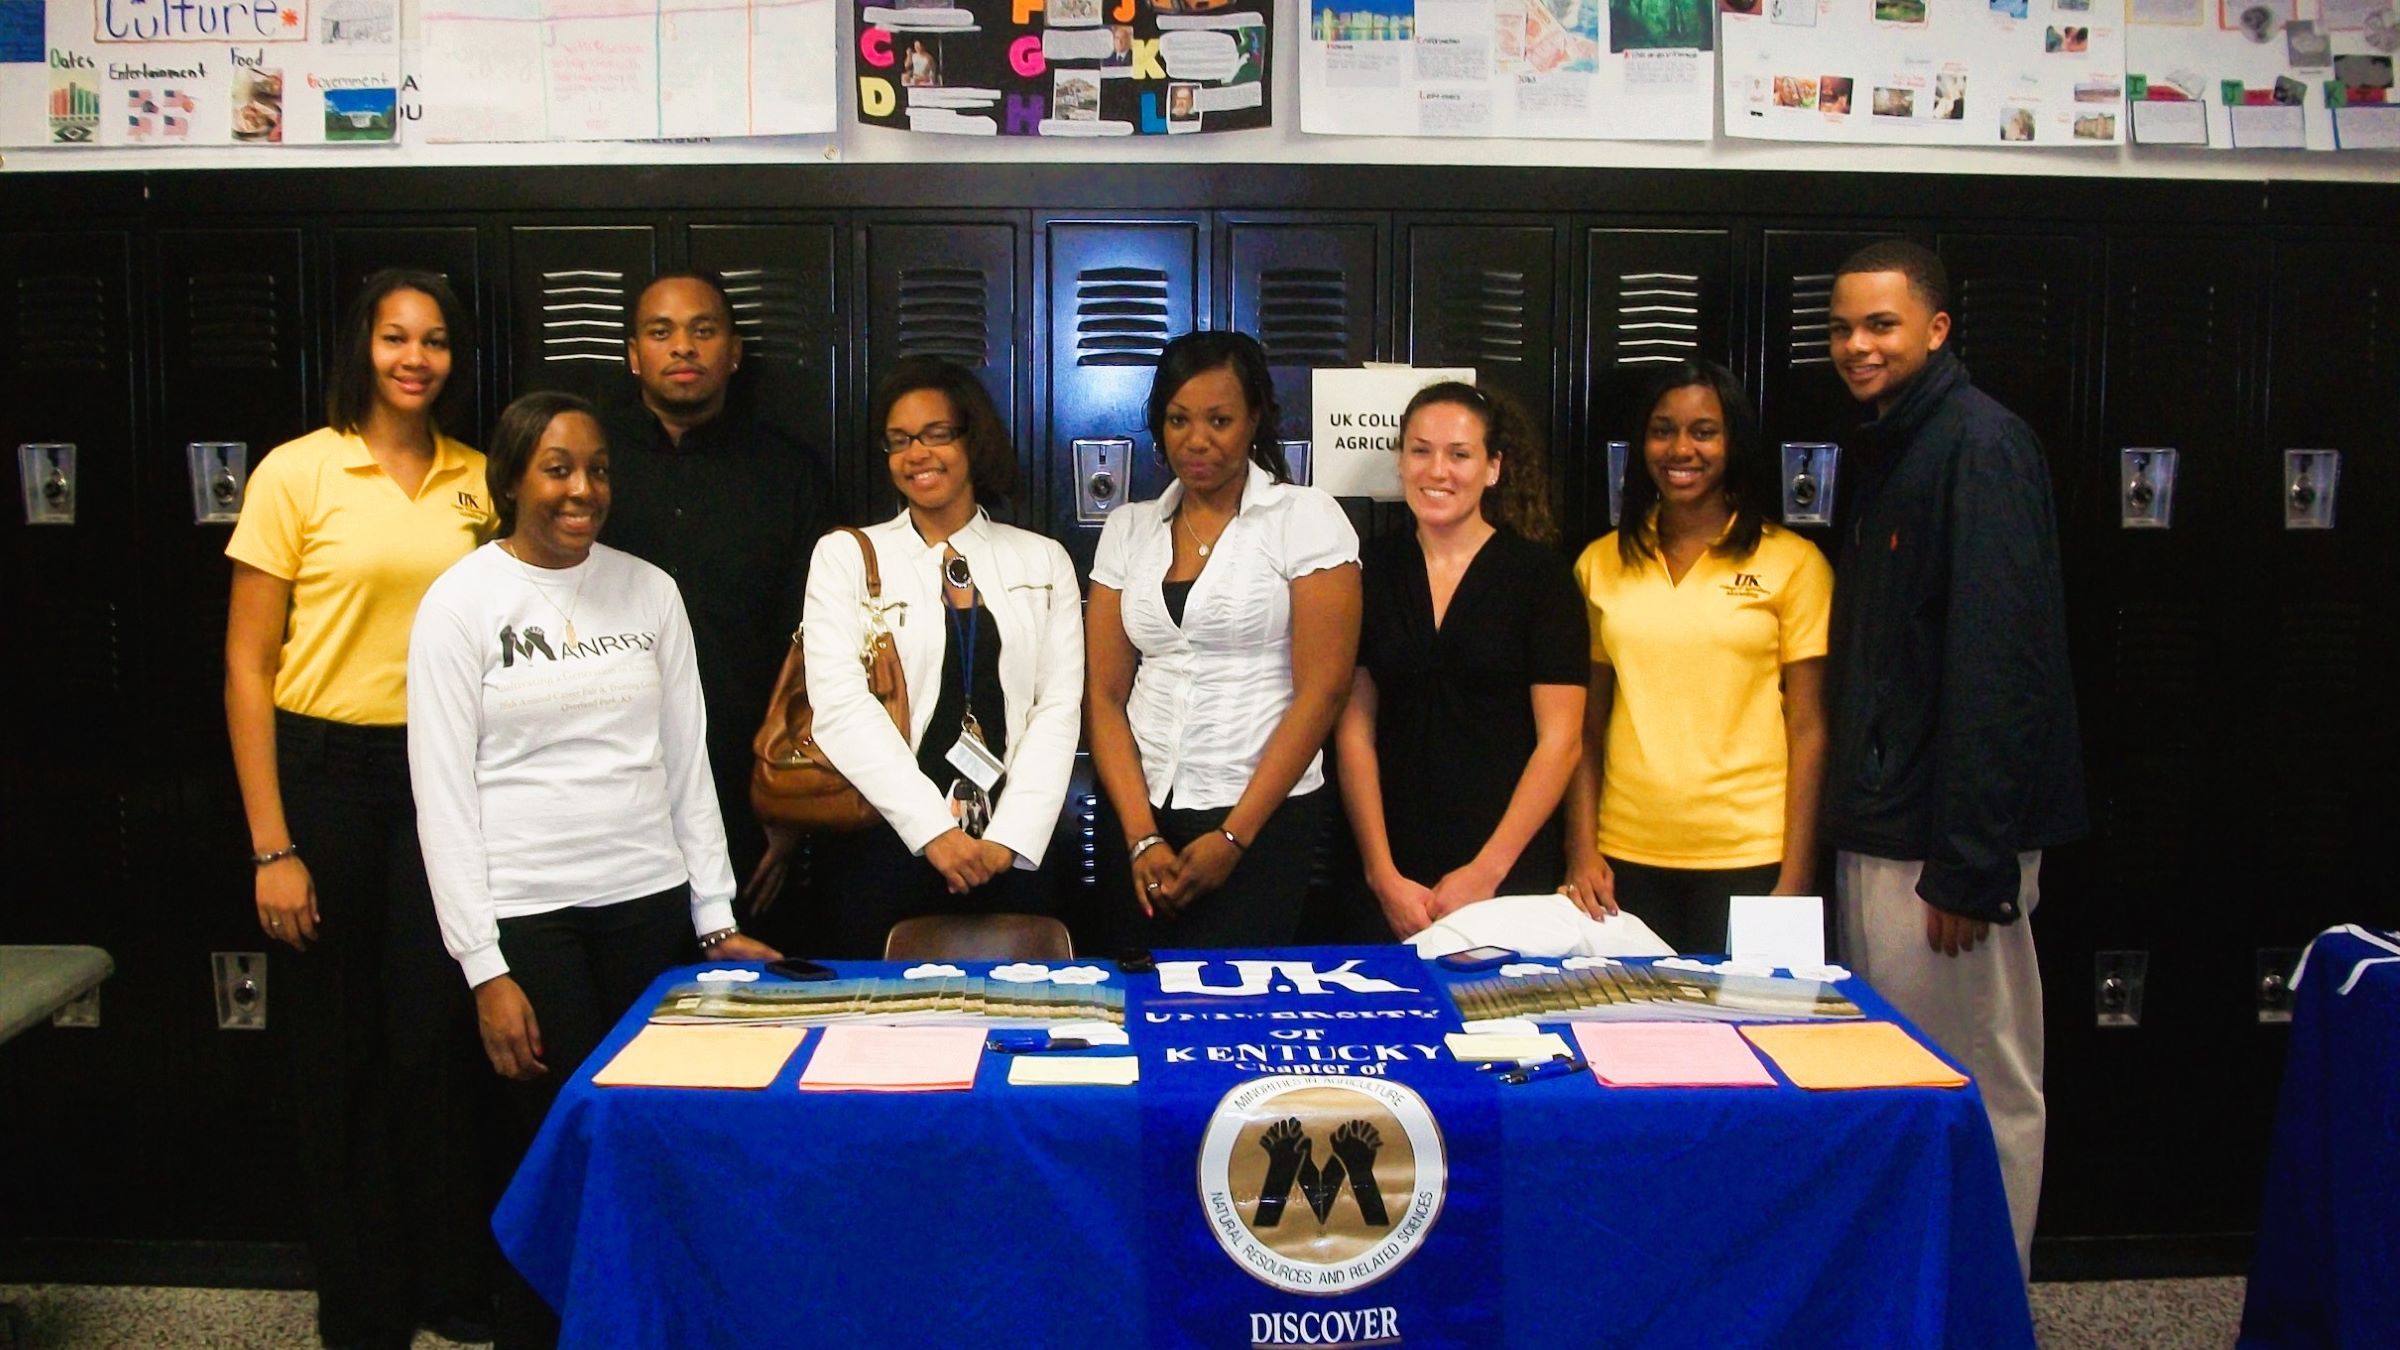 UK MANRRS was the first student organization that Kendriana Price joined. Photo provided by Kendriana Price.